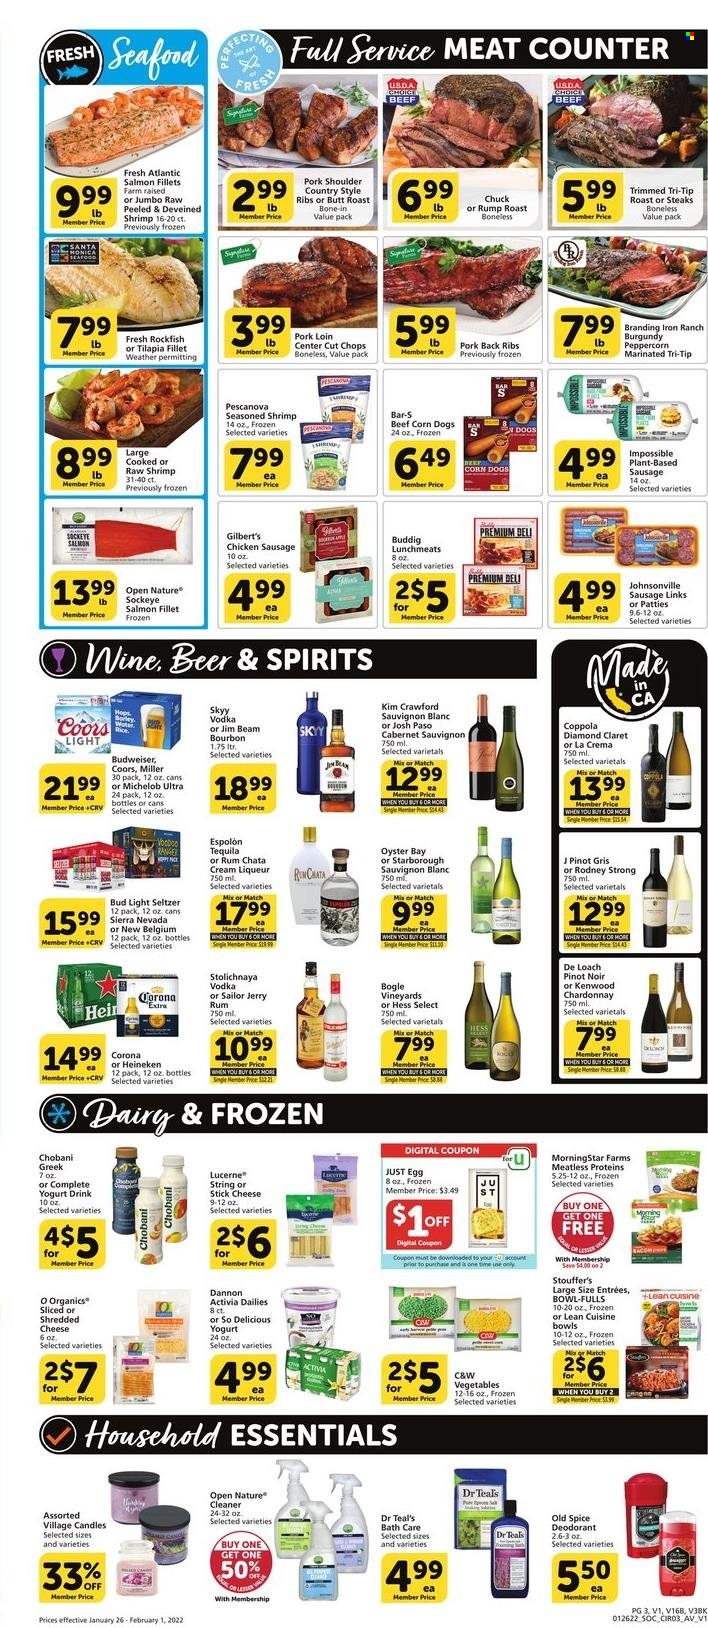 thumbnail - Vons Flyer - 01/26/2022 - 02/01/2022 - Sales products - beef meat, steak, chuck roast, Johnsonville, pork loin, pork meat, pork ribs, pork shoulder, pork back ribs, country style ribs, rockfish, salmon, salmon fillet, tilapia, oysters, shrimps, MorningStar Farms, Lean Cuisine, bowl-fulls, sausage, chicken sausage, Gilbert’s, lunch meat, shredded cheese, yoghurt, Activia, Chobani, Dannon, yoghurt drink, eggs, cheese sticks, Stouffer's, spice, Cabernet Sauvignon, red wine, white wine, Chardonnay, wine, Pinot Noir, Pinot Grigio, Sauvignon Blanc, liqueur, rum, tequila, vodka, SKYY, Jim Beam, Hard Seltzer, beer, Bud Light, Corona Extra, Miller, cleaner, Old Spice, anti-perspirant, deodorant, candle, Budweiser, Coors, Michelob. Page 3.